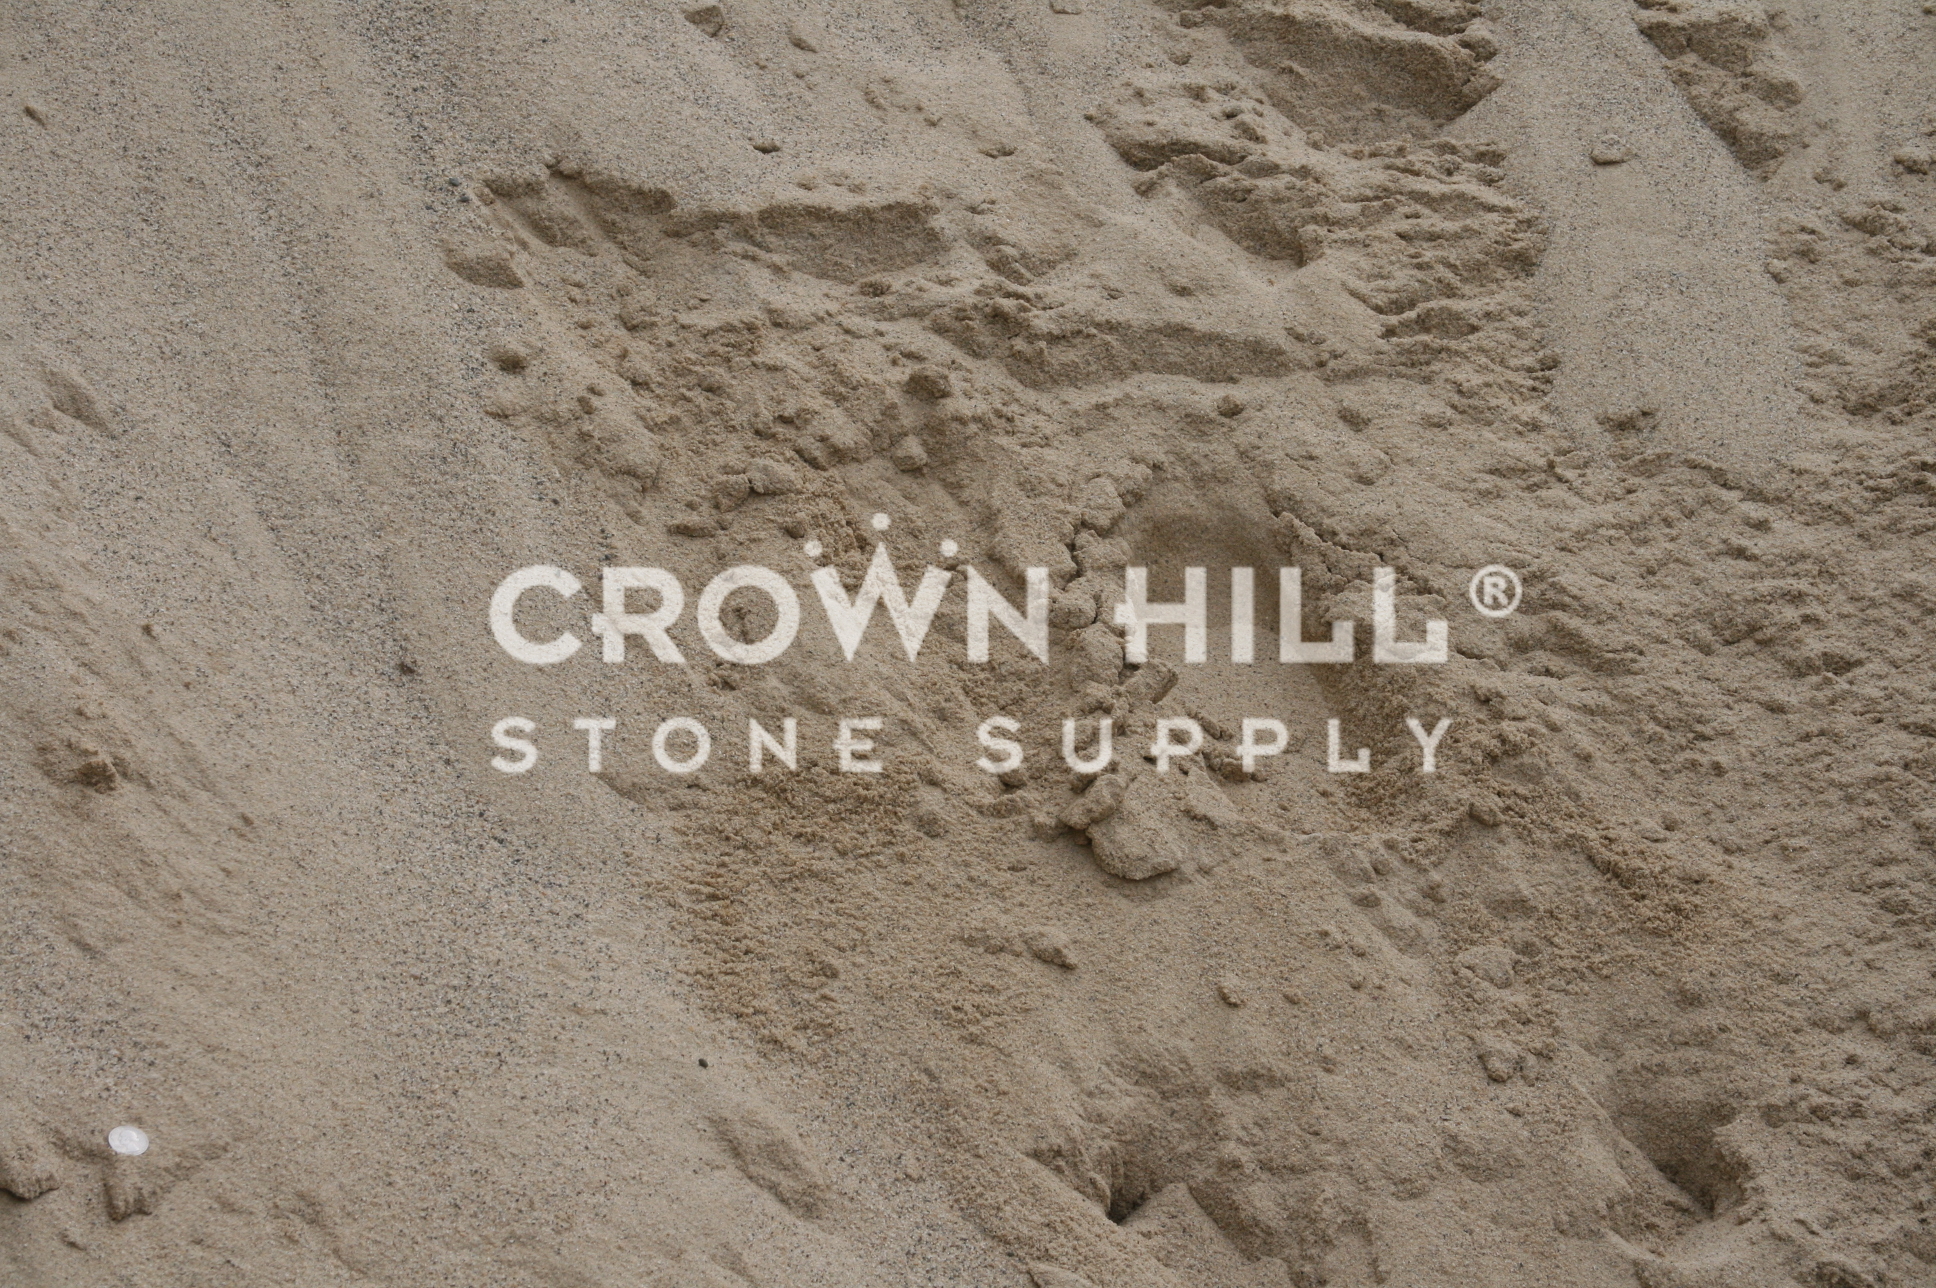 Crown hill stone supply